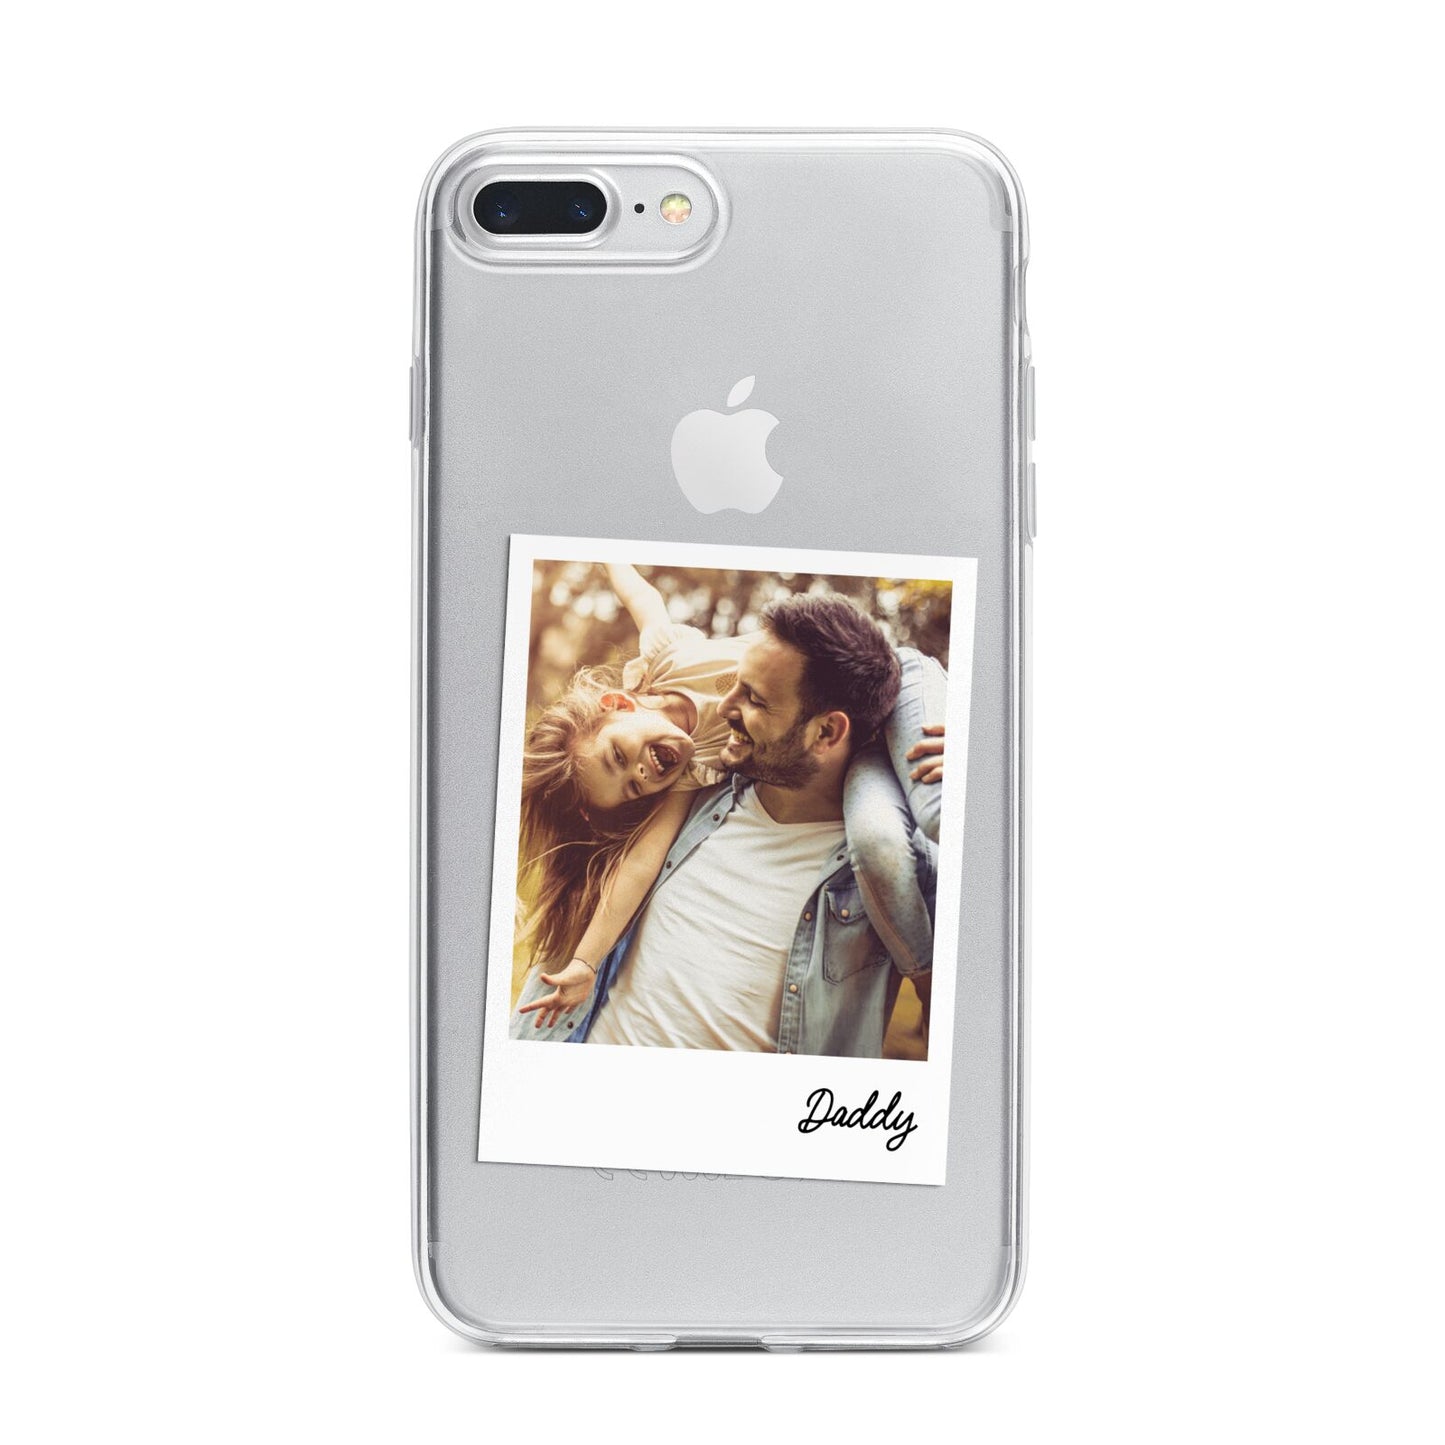 Fathers Day Photo iPhone 7 Plus Bumper Case on Silver iPhone